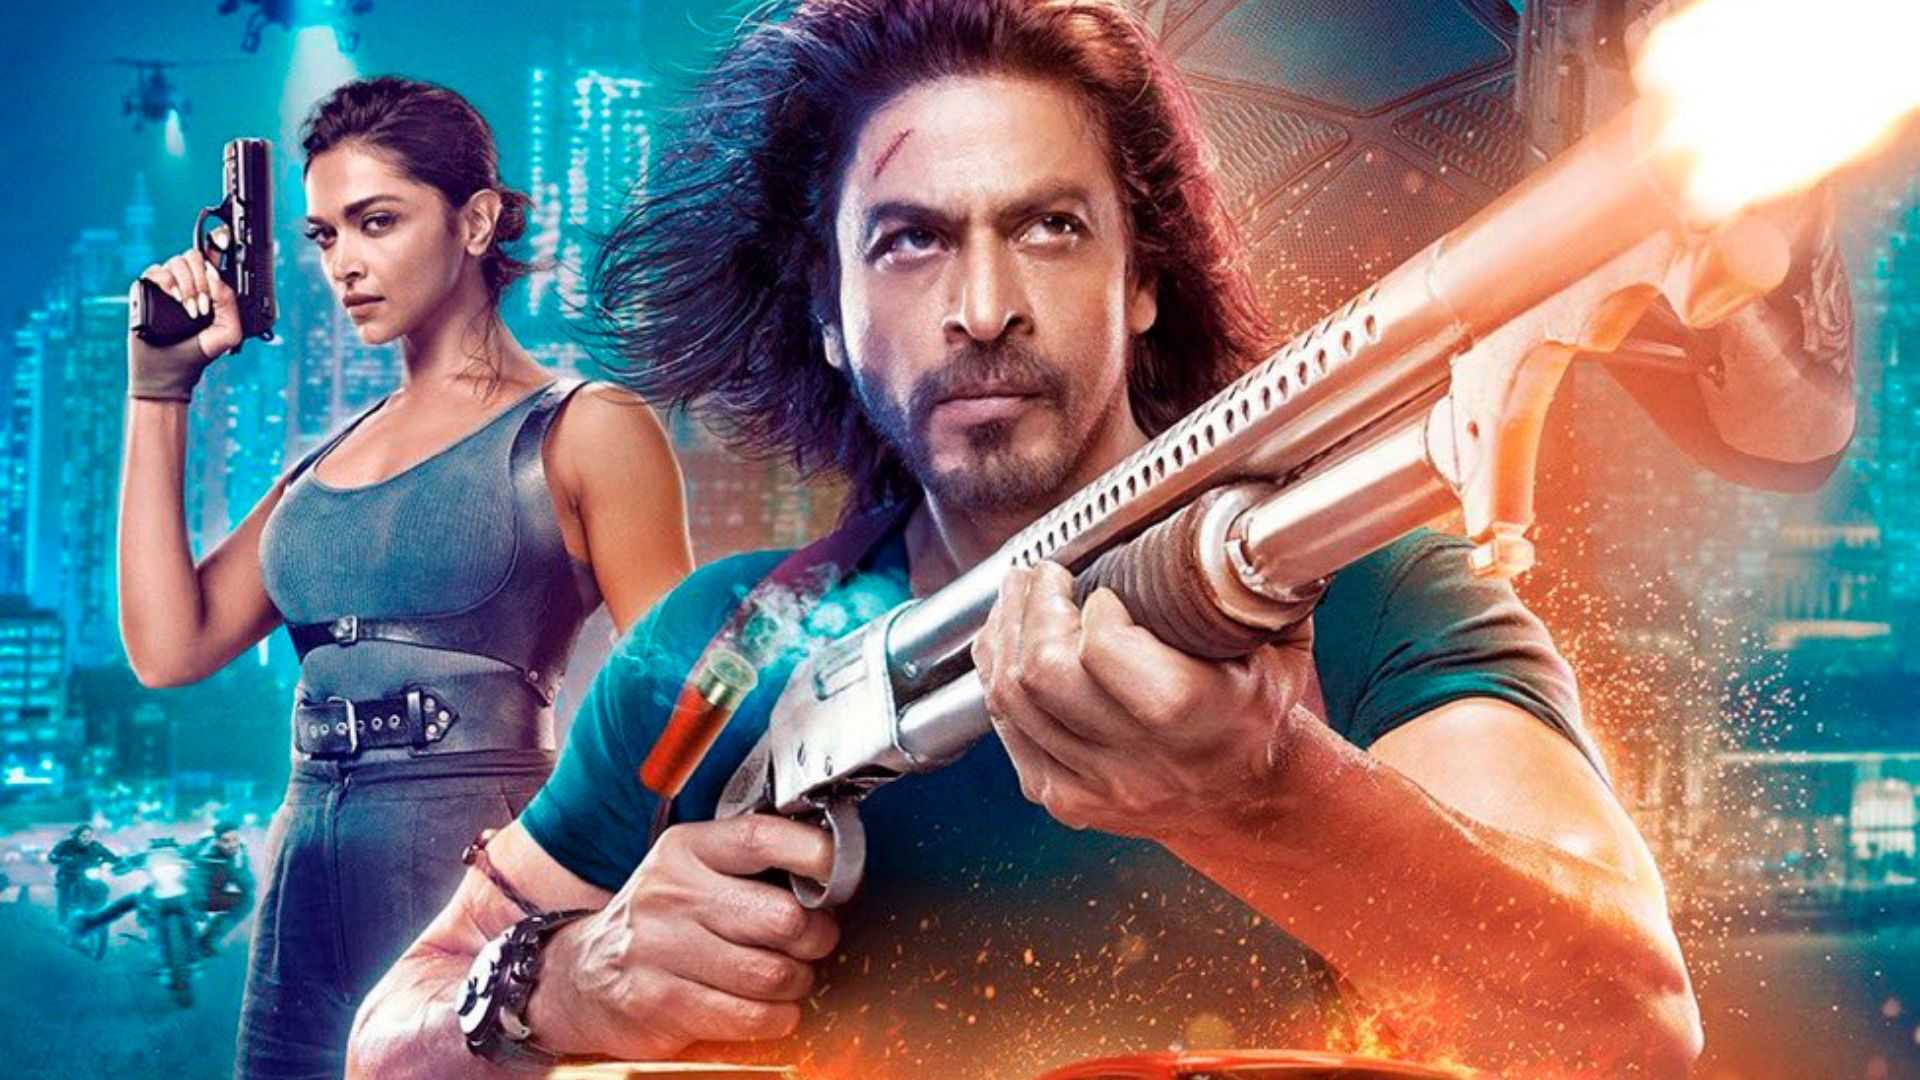 Pathaan box office collection day 4: Shah Rukh Khan's film is a thunderstorm, becomes fastest film to cross Rs 200 crore